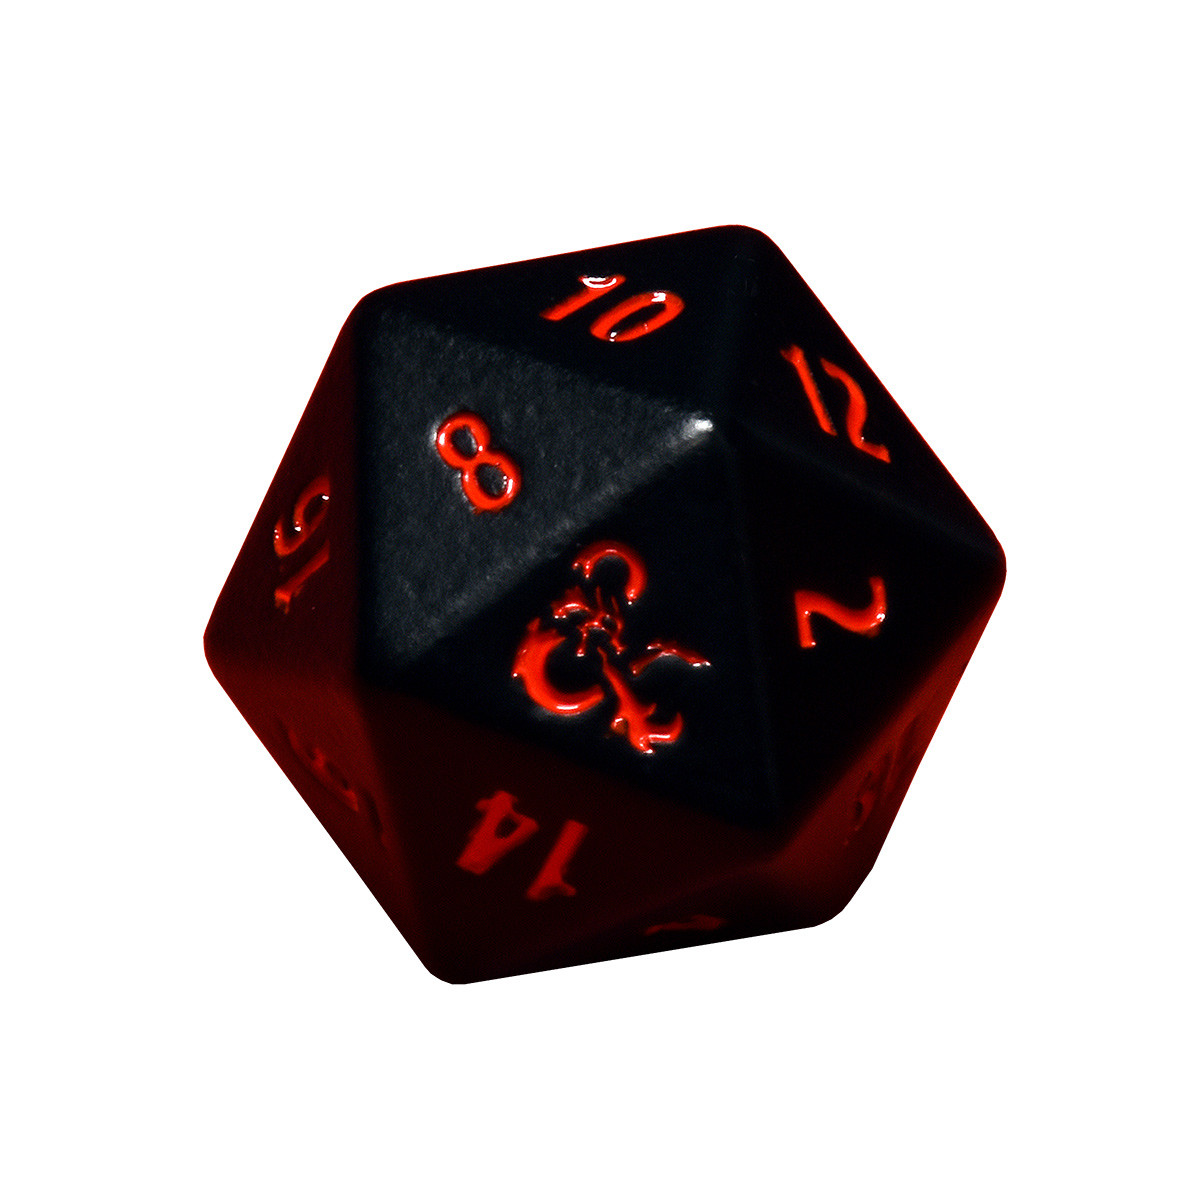 Ultra Pro - Heavy Metal D20 Dice Set - Dungeons & Dragons - The Mana Shop